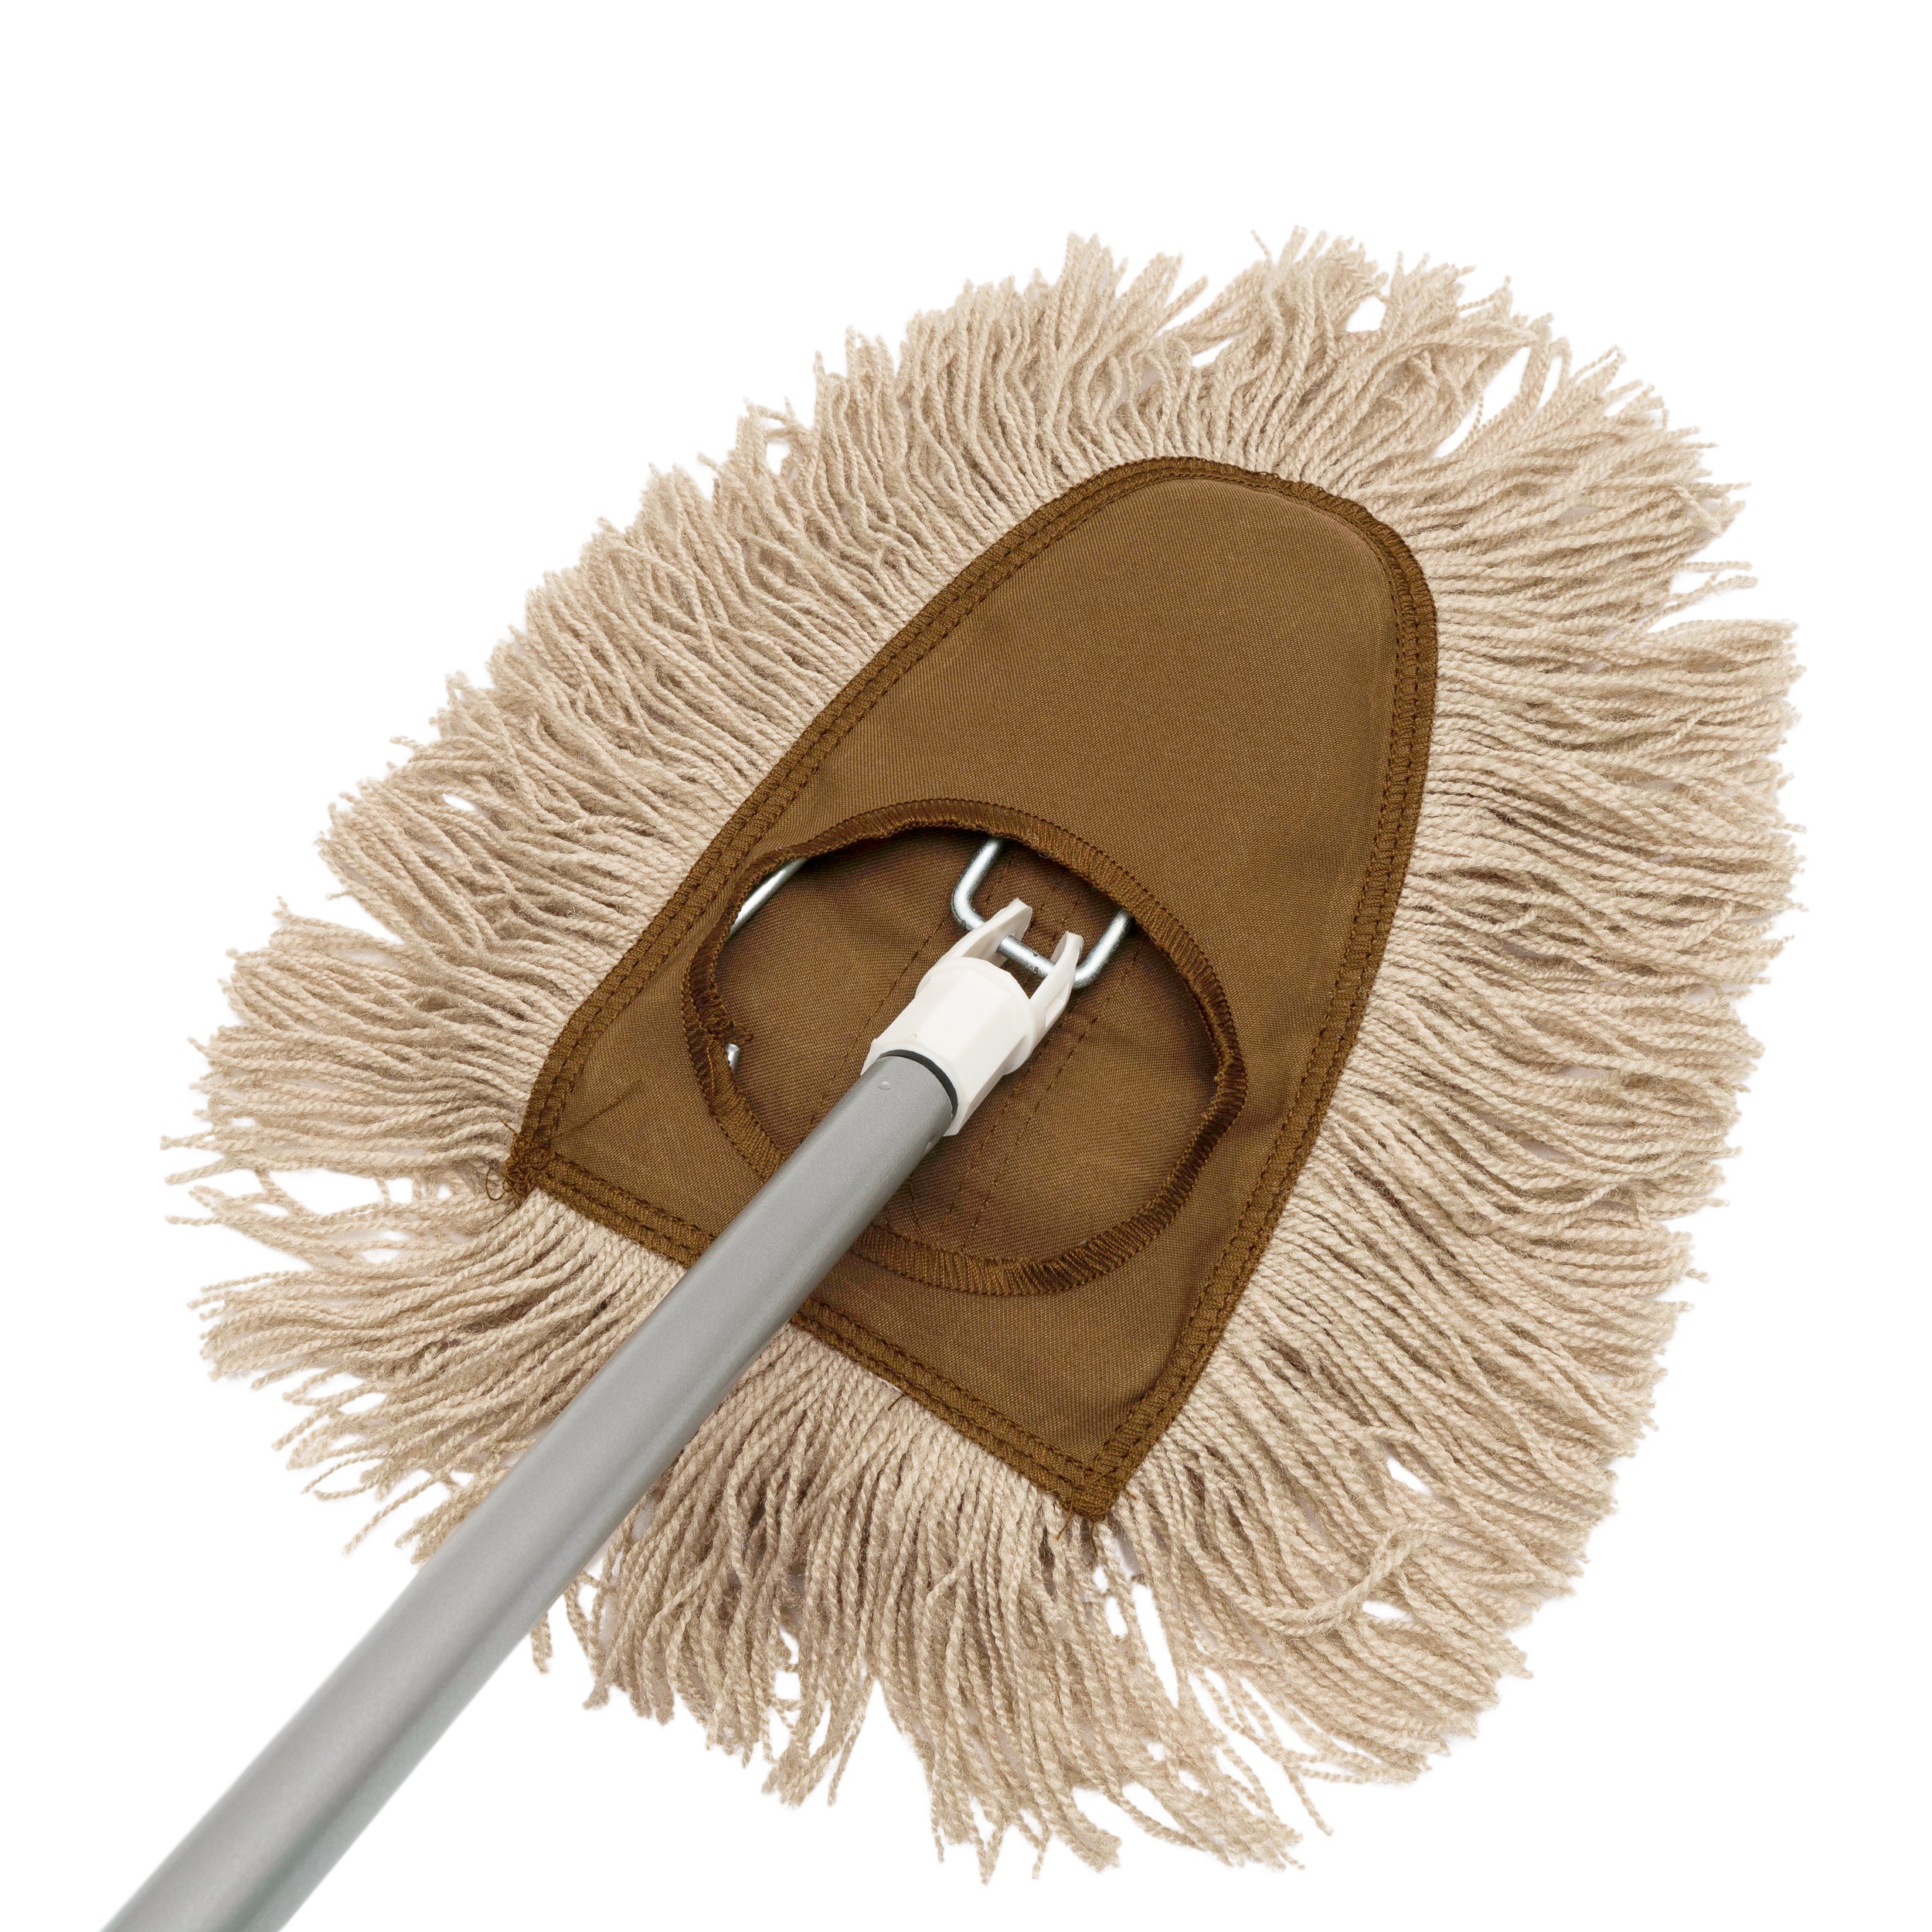 Dry Dust Mop Head with Frame & Adjustable Handle